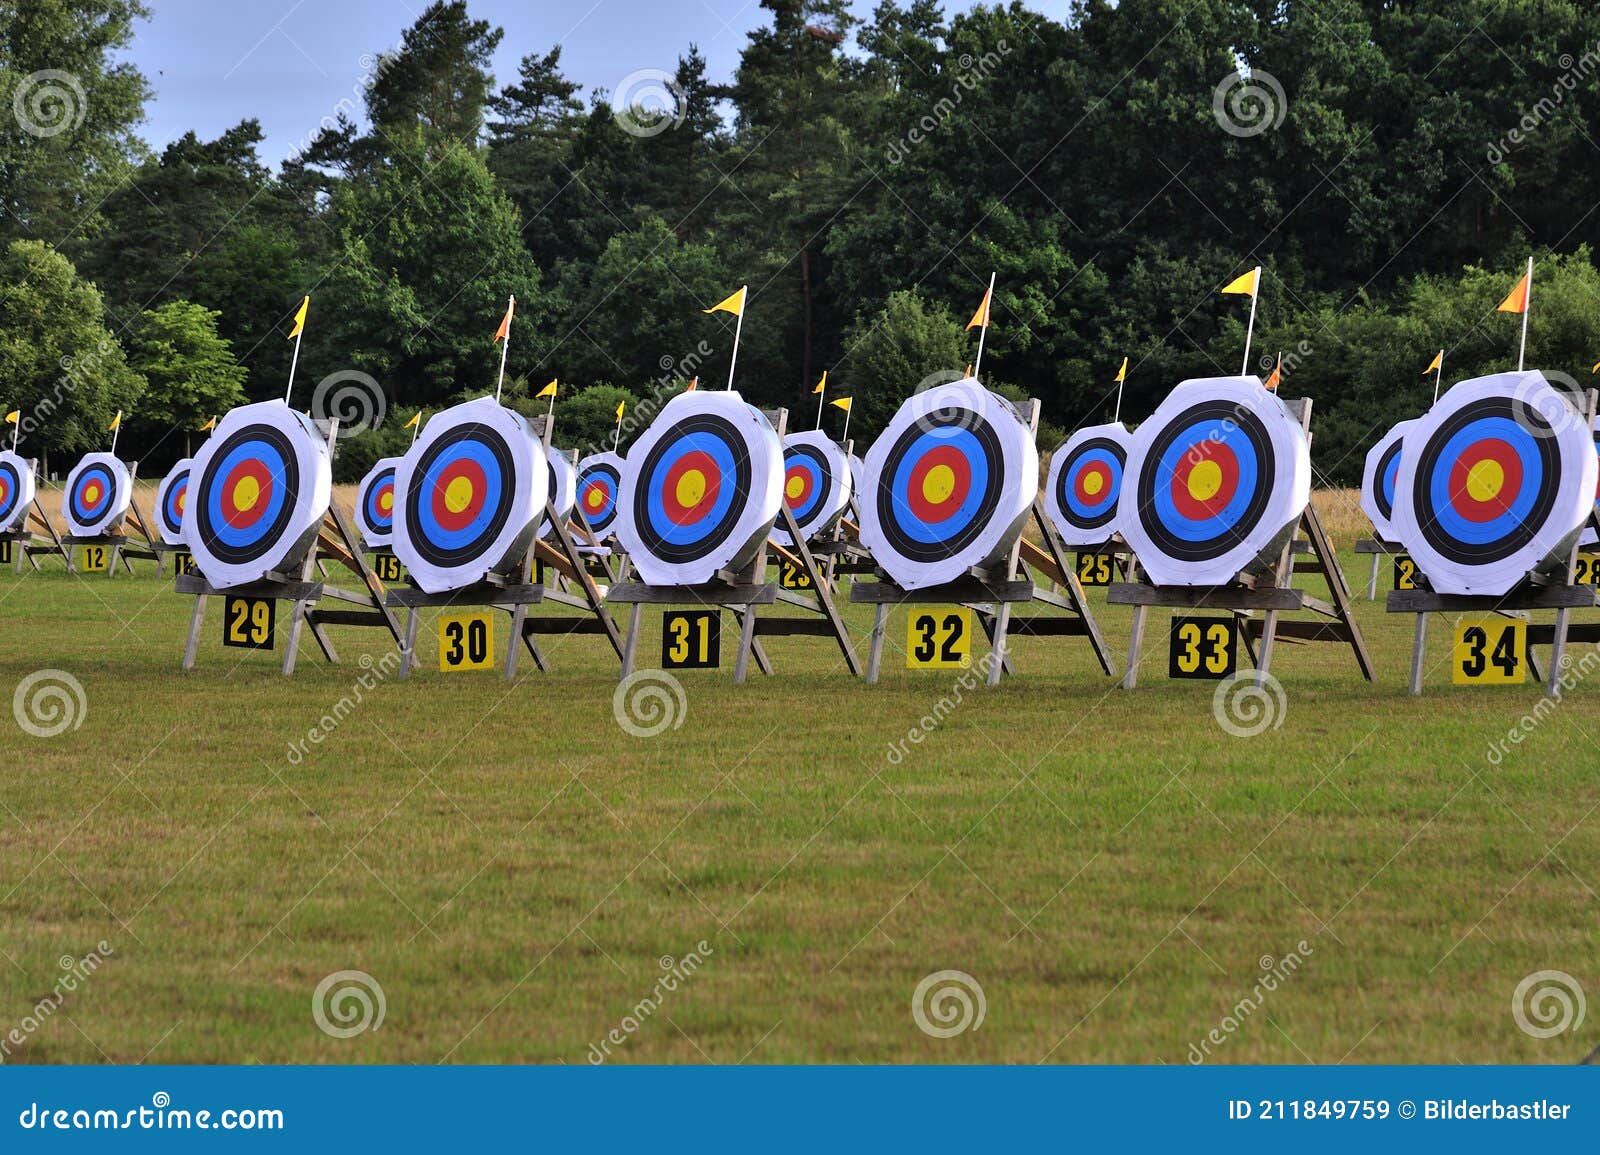 archery target field at archery championship competition shooting range